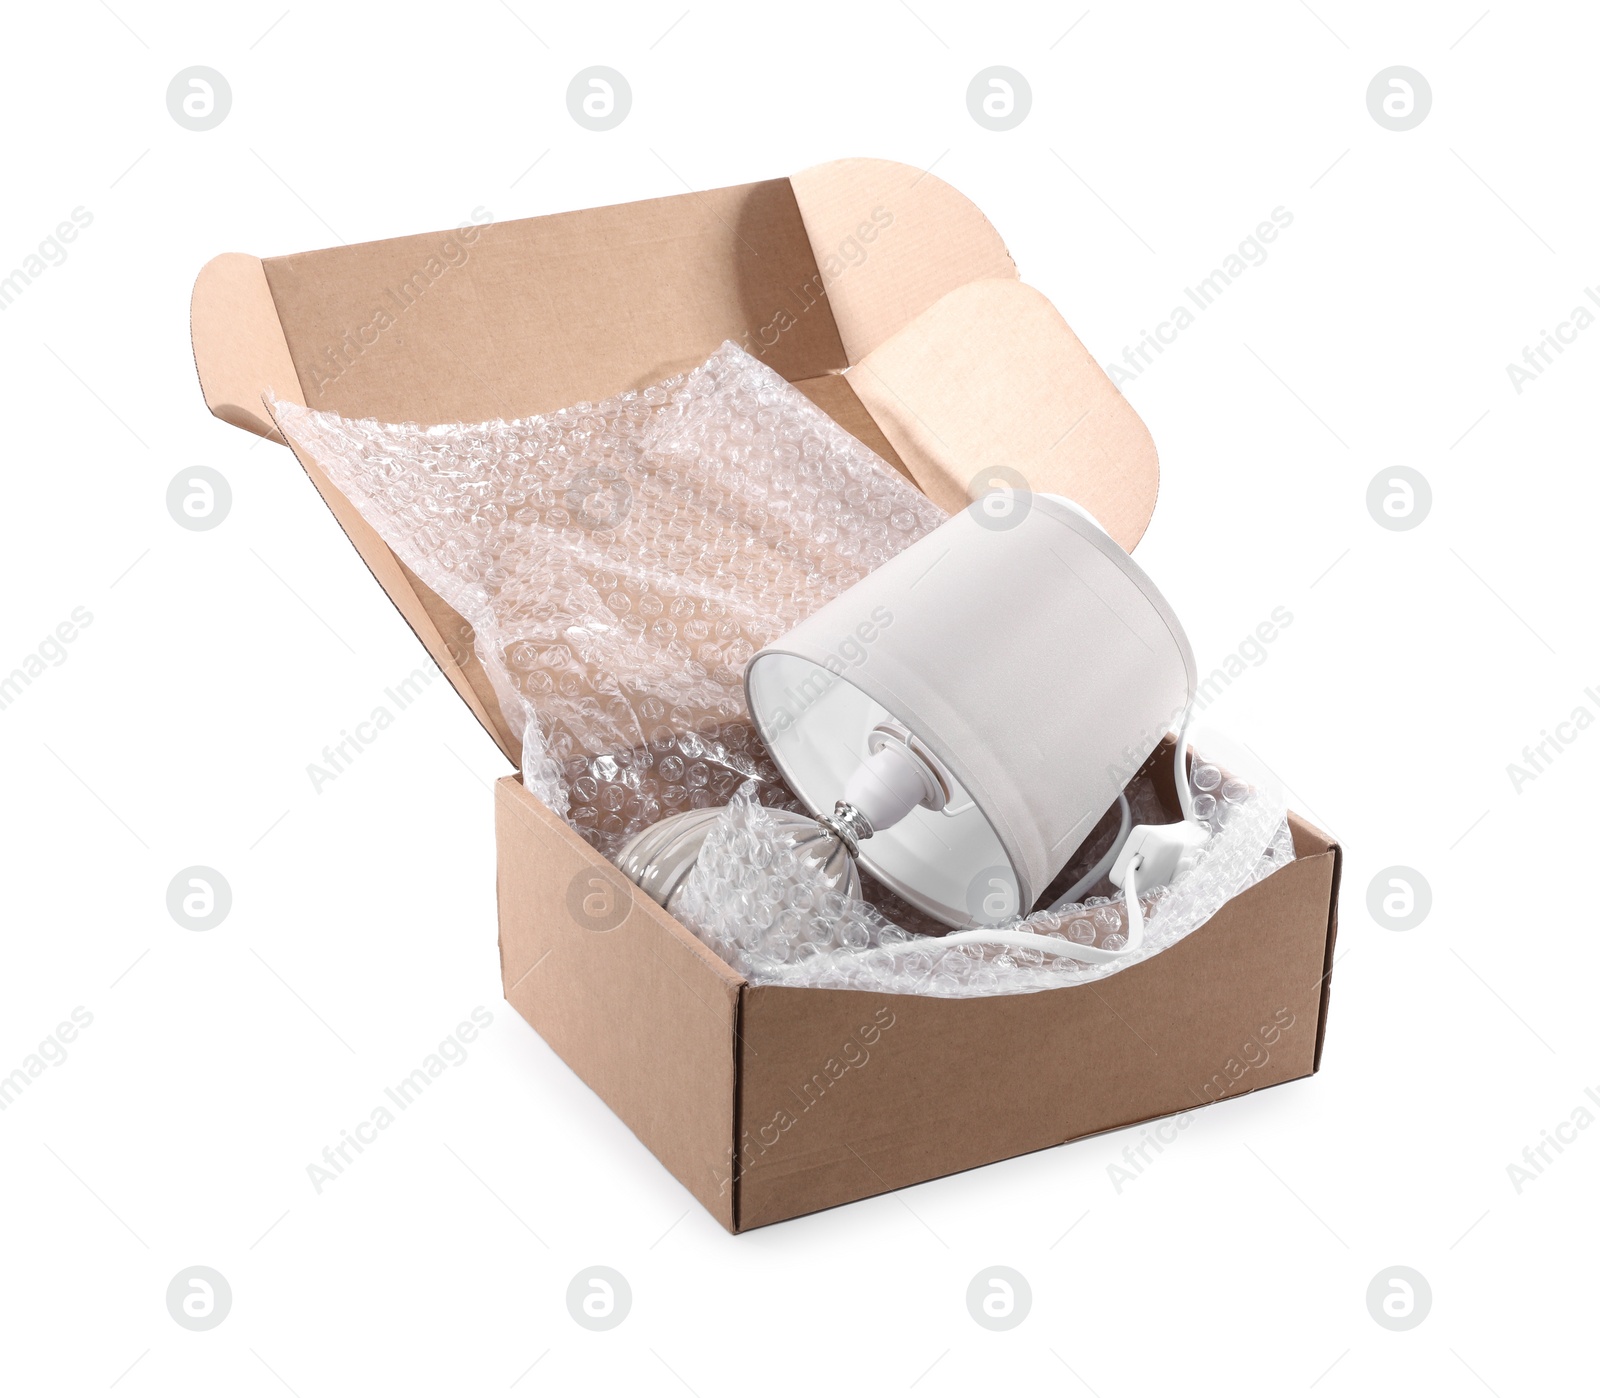 Photo of Lamp with bubble wrap in cardboard box isolated on white